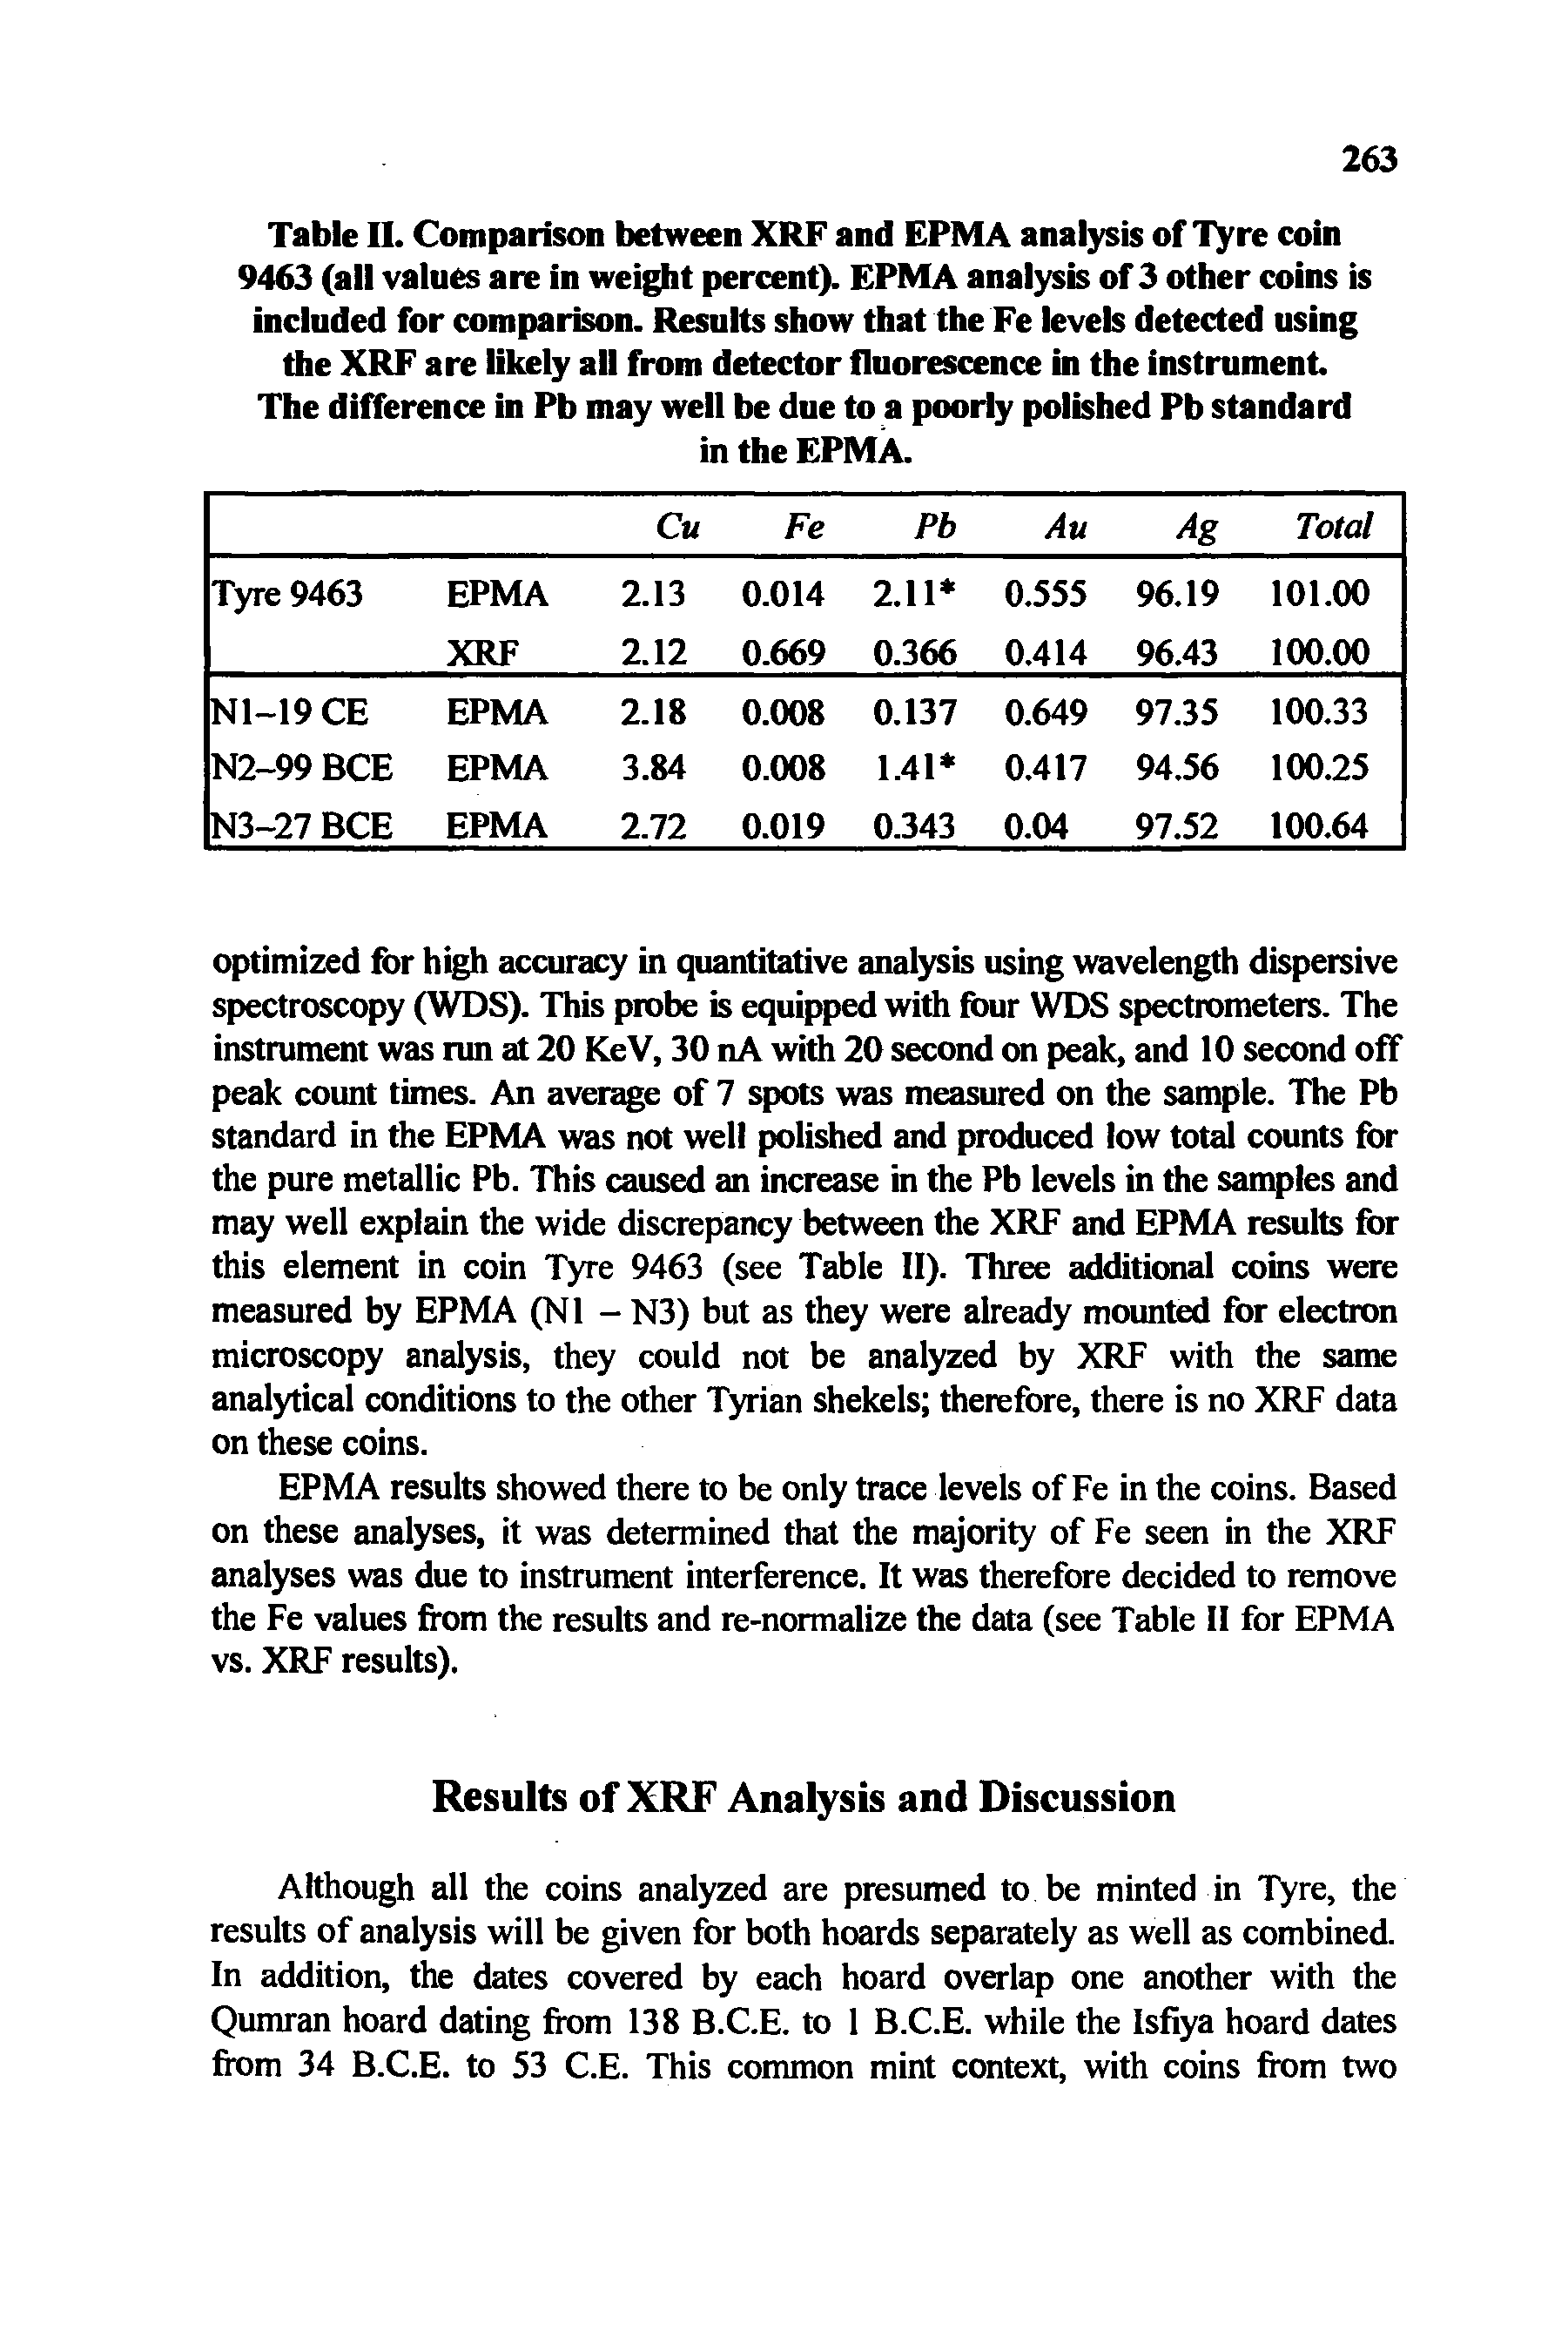 Table II. Comparison between XRF and EPMA analysis of Tyre coin 9463 (all values are in weight percent). EPMA analysis of 3 other coins is included for comparison. Results show that the Fe levels detected using the XRF are likely all from detector fluorescence in the instrument The difference in Pb may well be due to a poorly polished Pb standard...